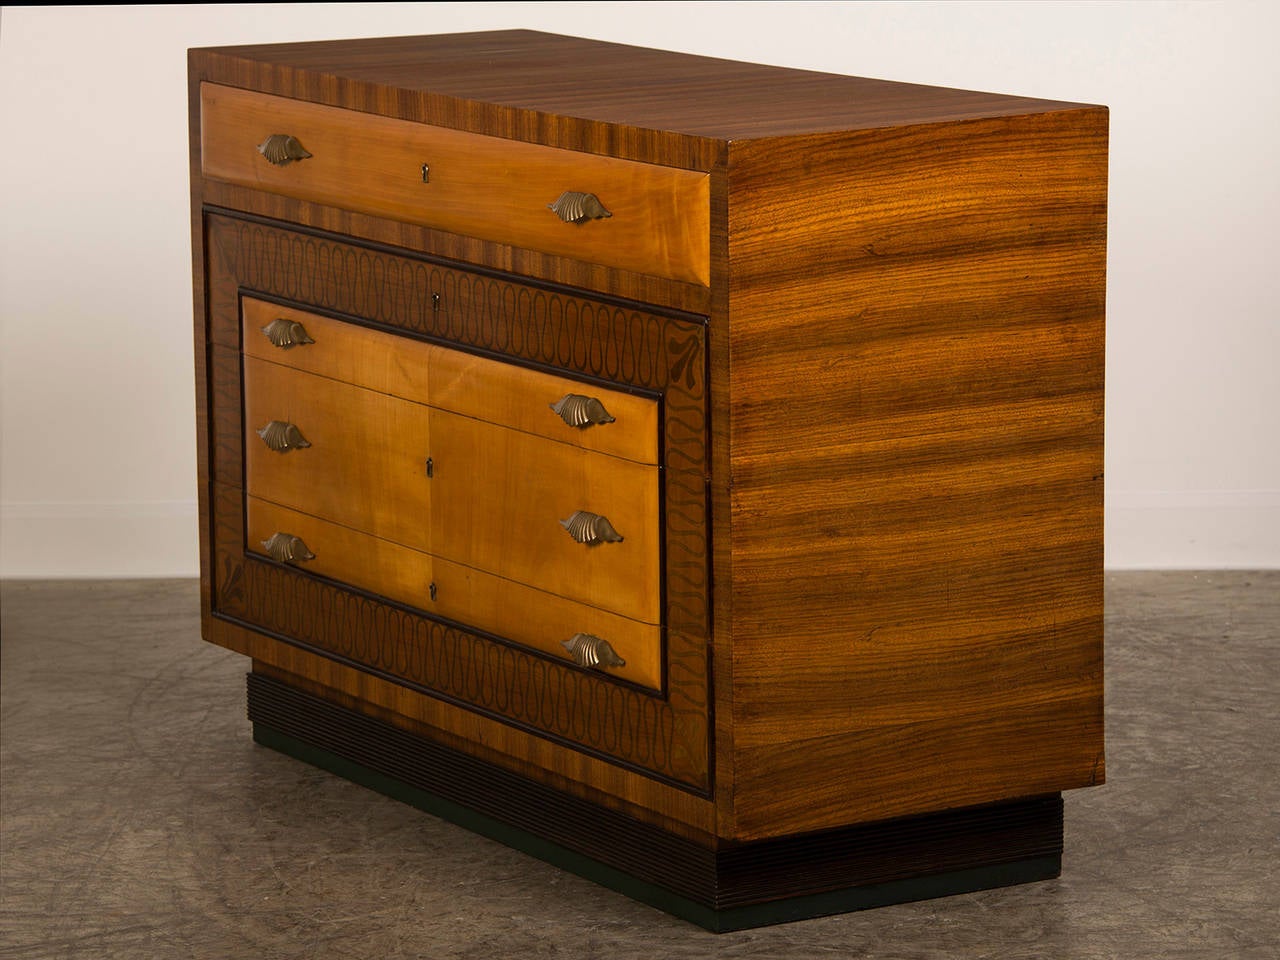 Vintage Italian Art Deco Period Walnut, Maple Chest of Drawers, circa 1930 For Sale 2